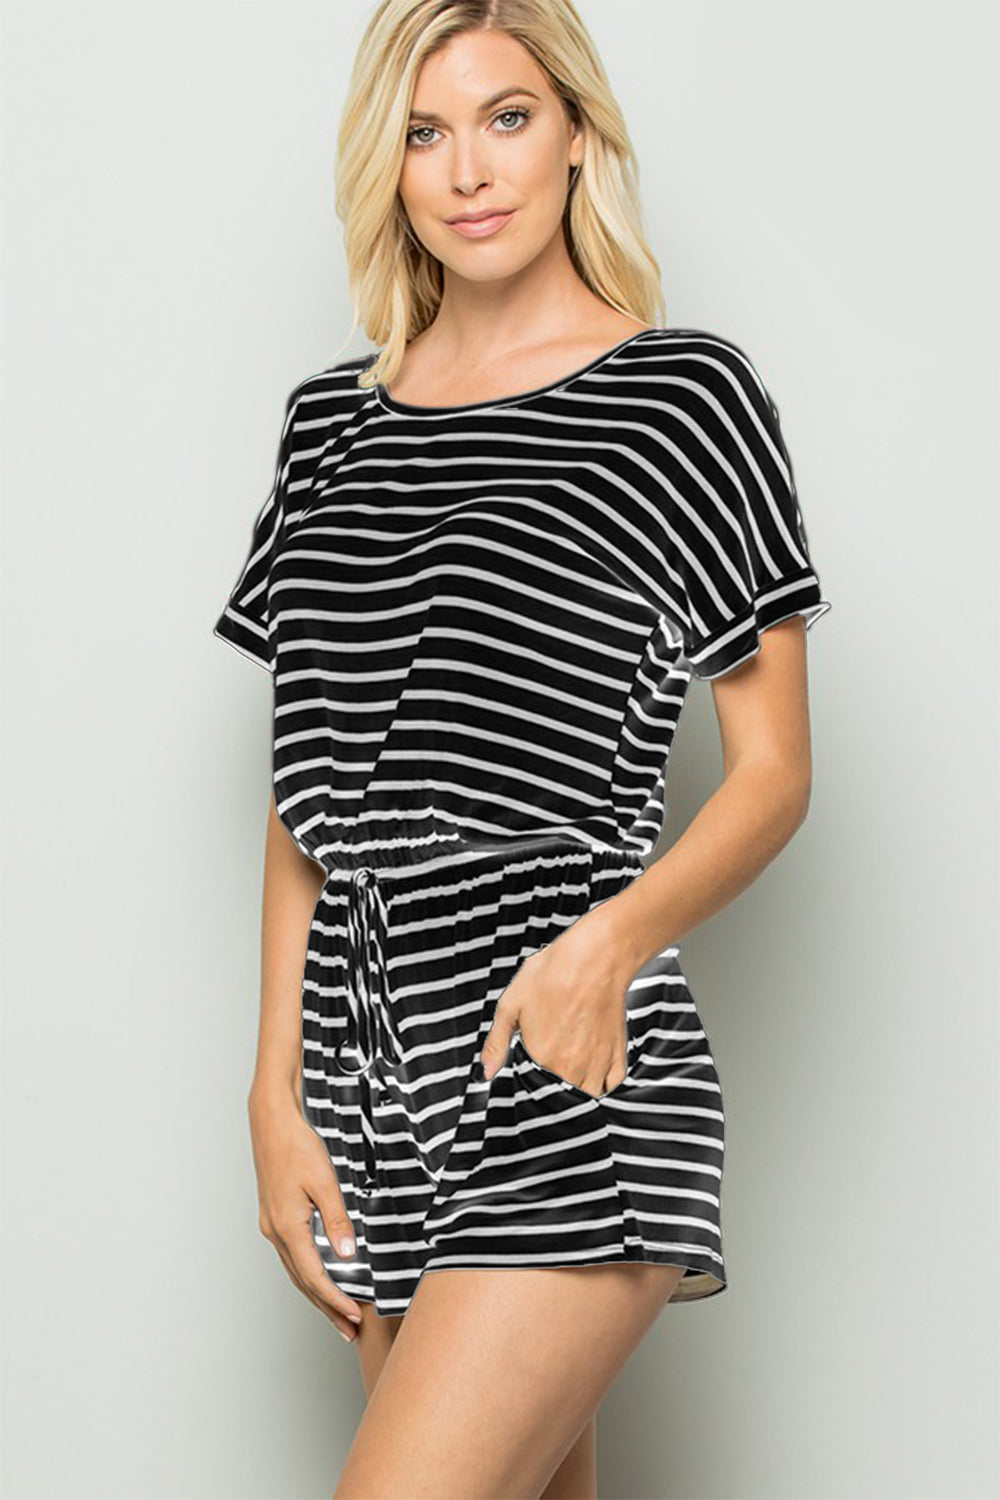 Black and White Striped Round Neck Short Sleeve Romper Petite and Plus Size Fashion